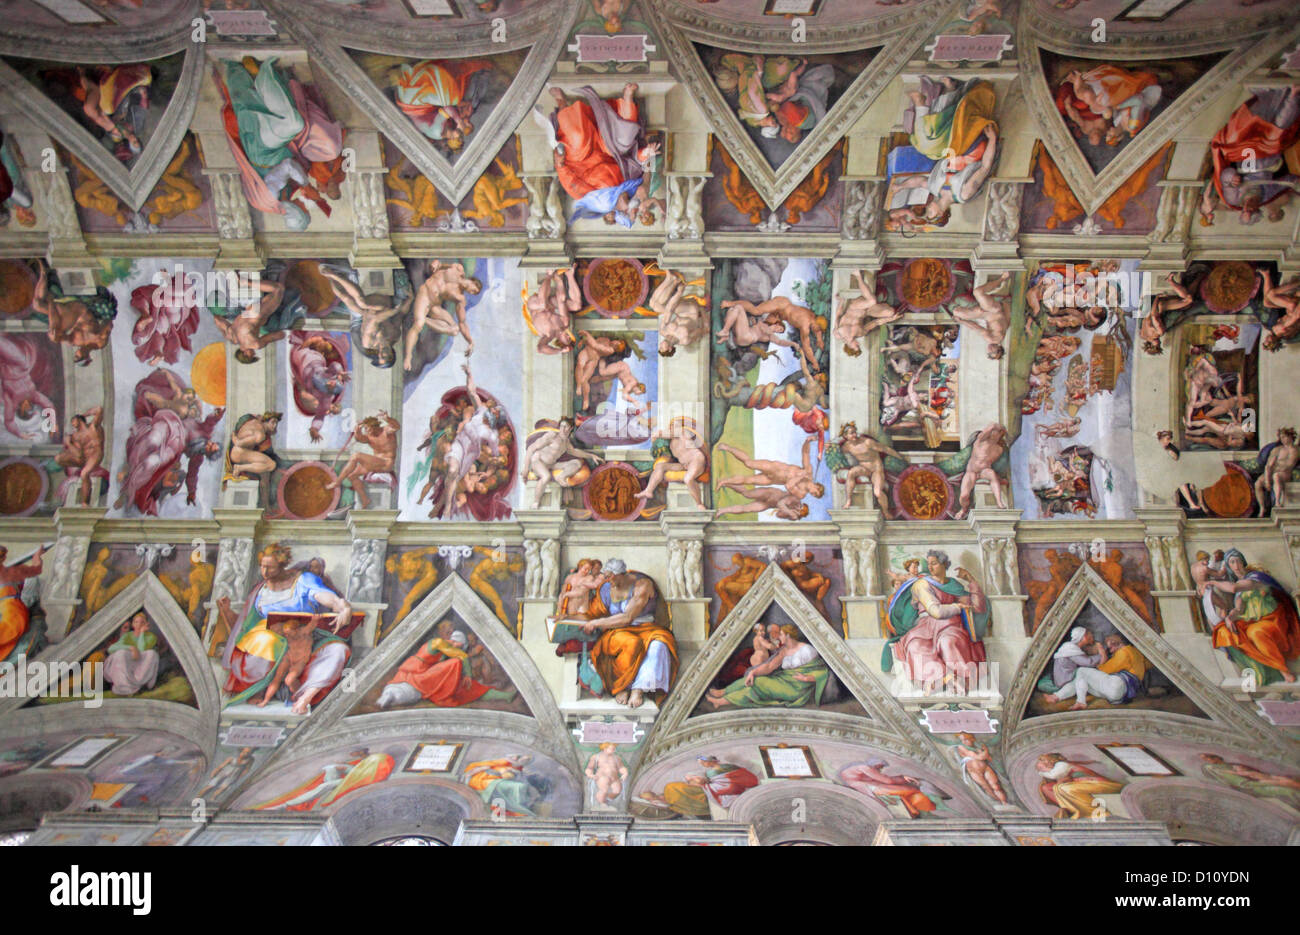 The Sistine chapel by Michelangelo, Vatican, Rome, Italy Stock Photo